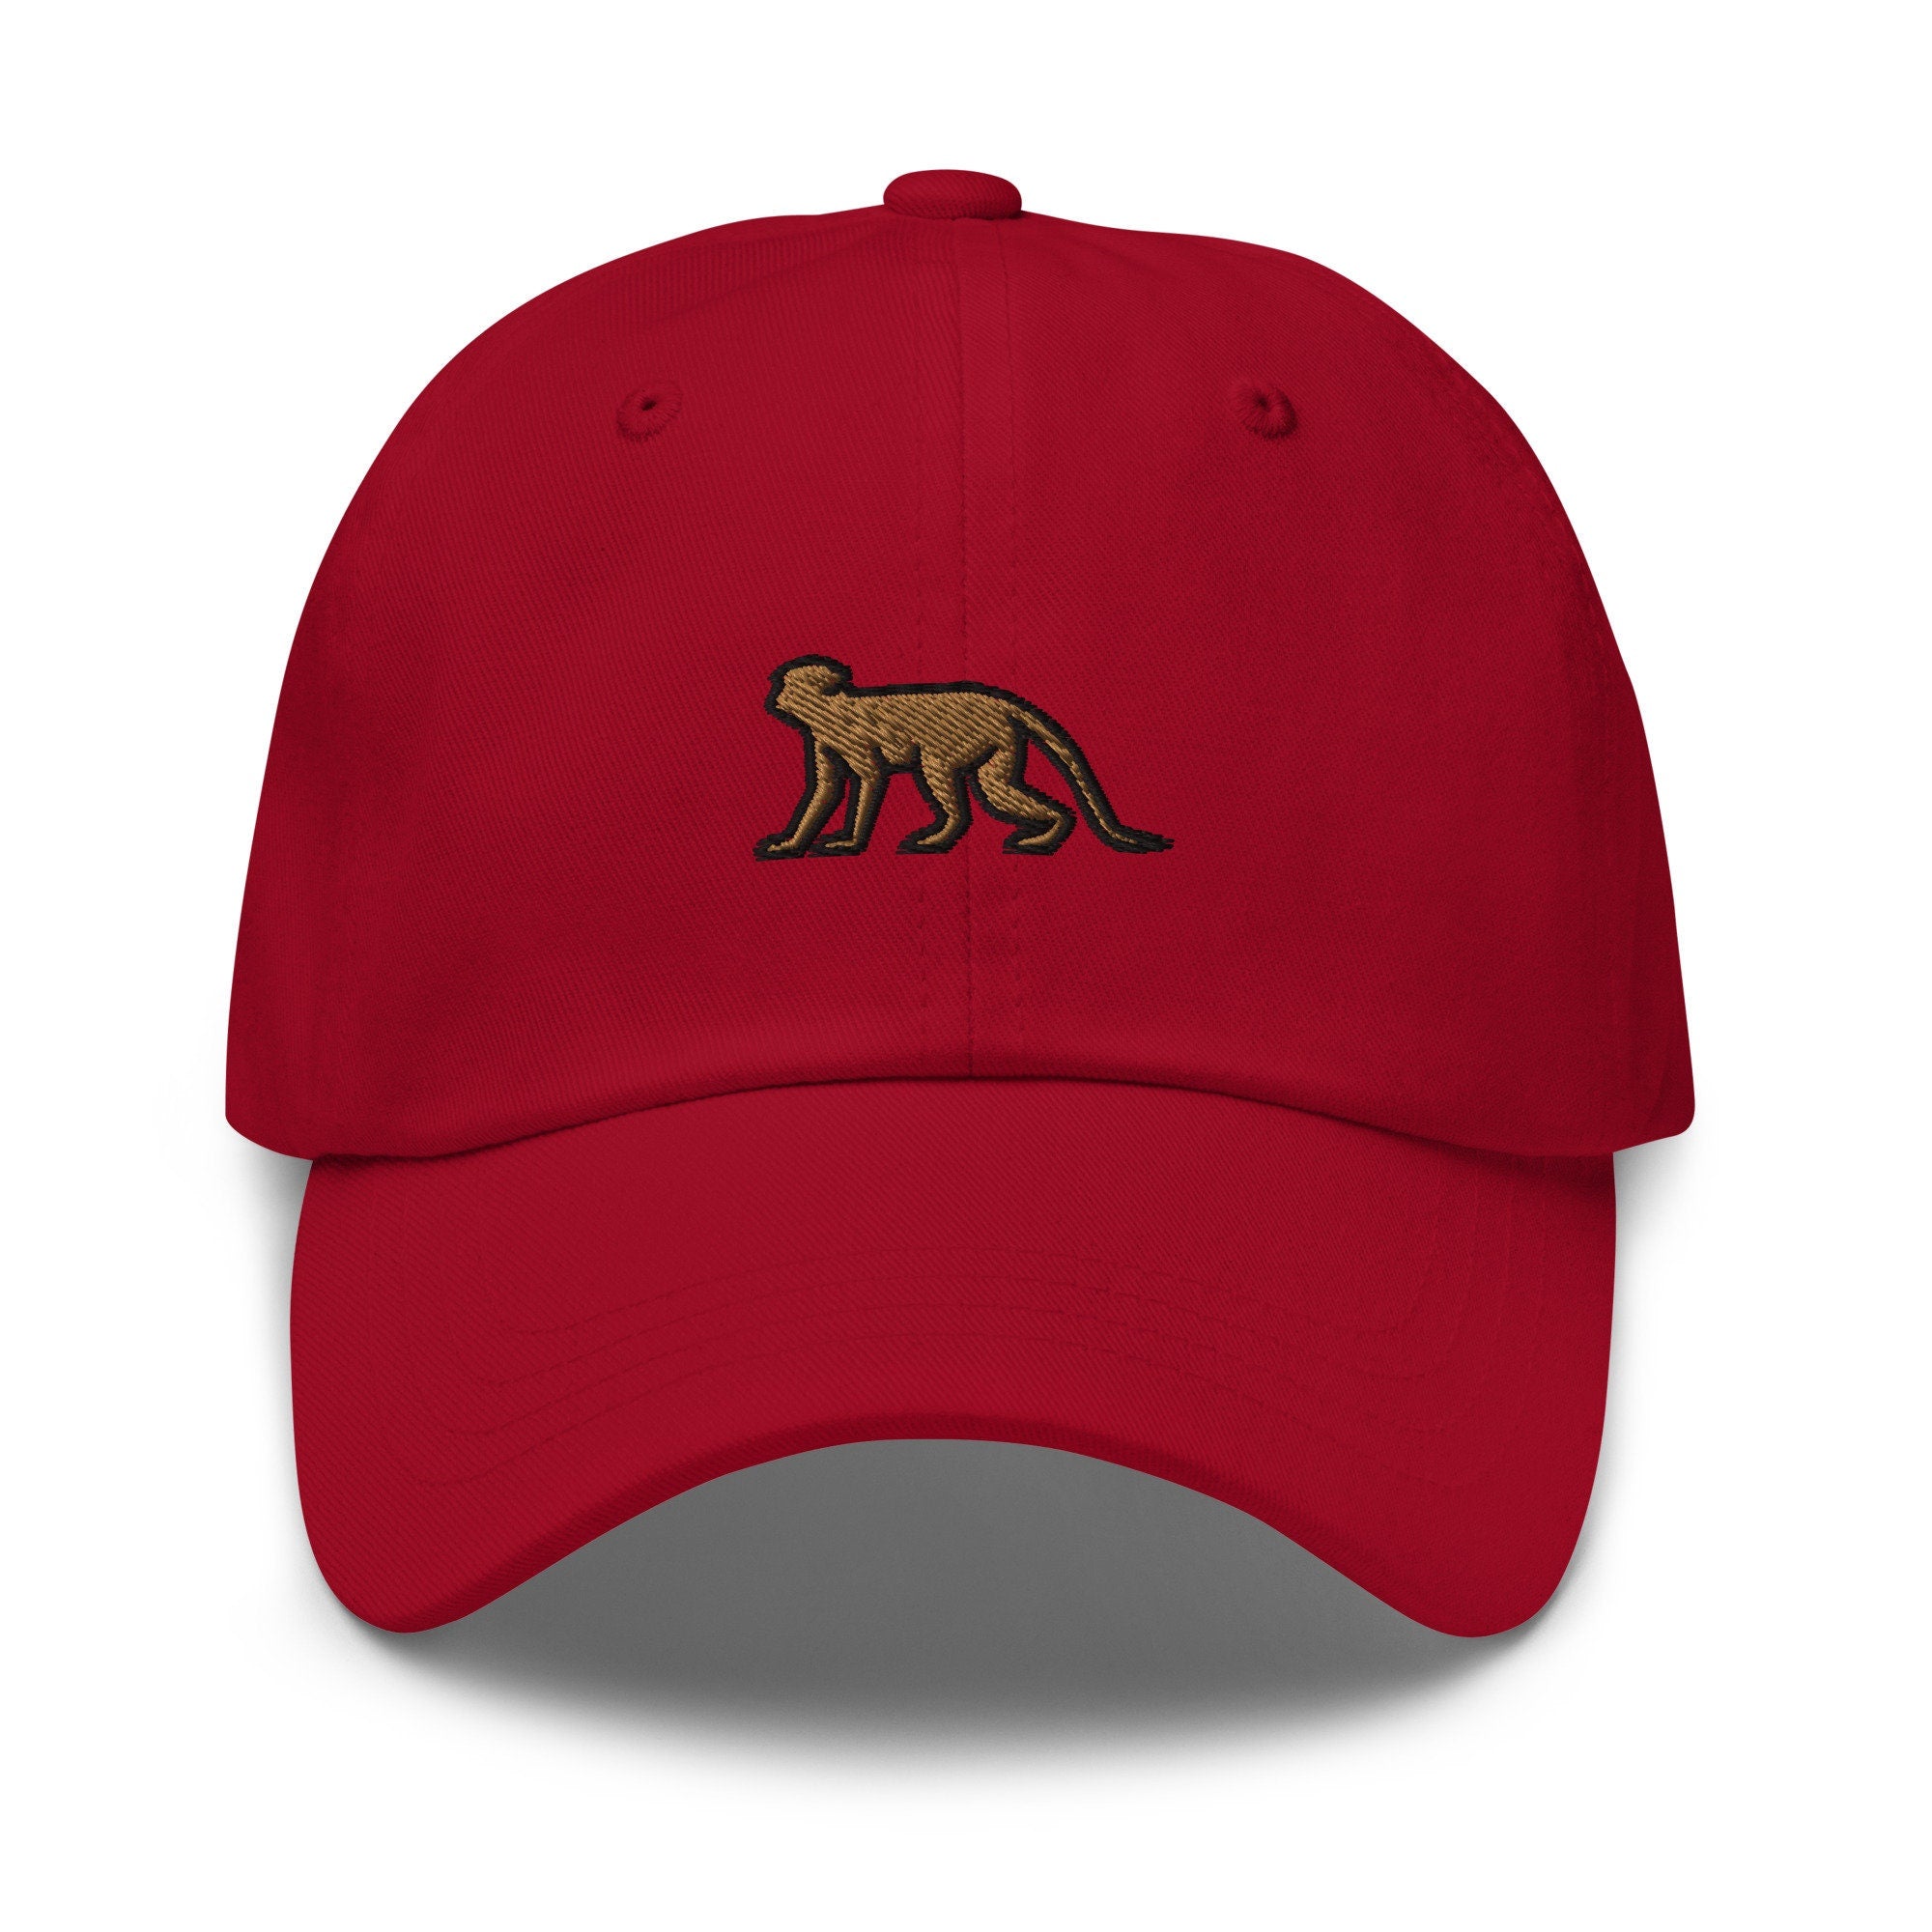 Monkey Embroidered Dad Hat